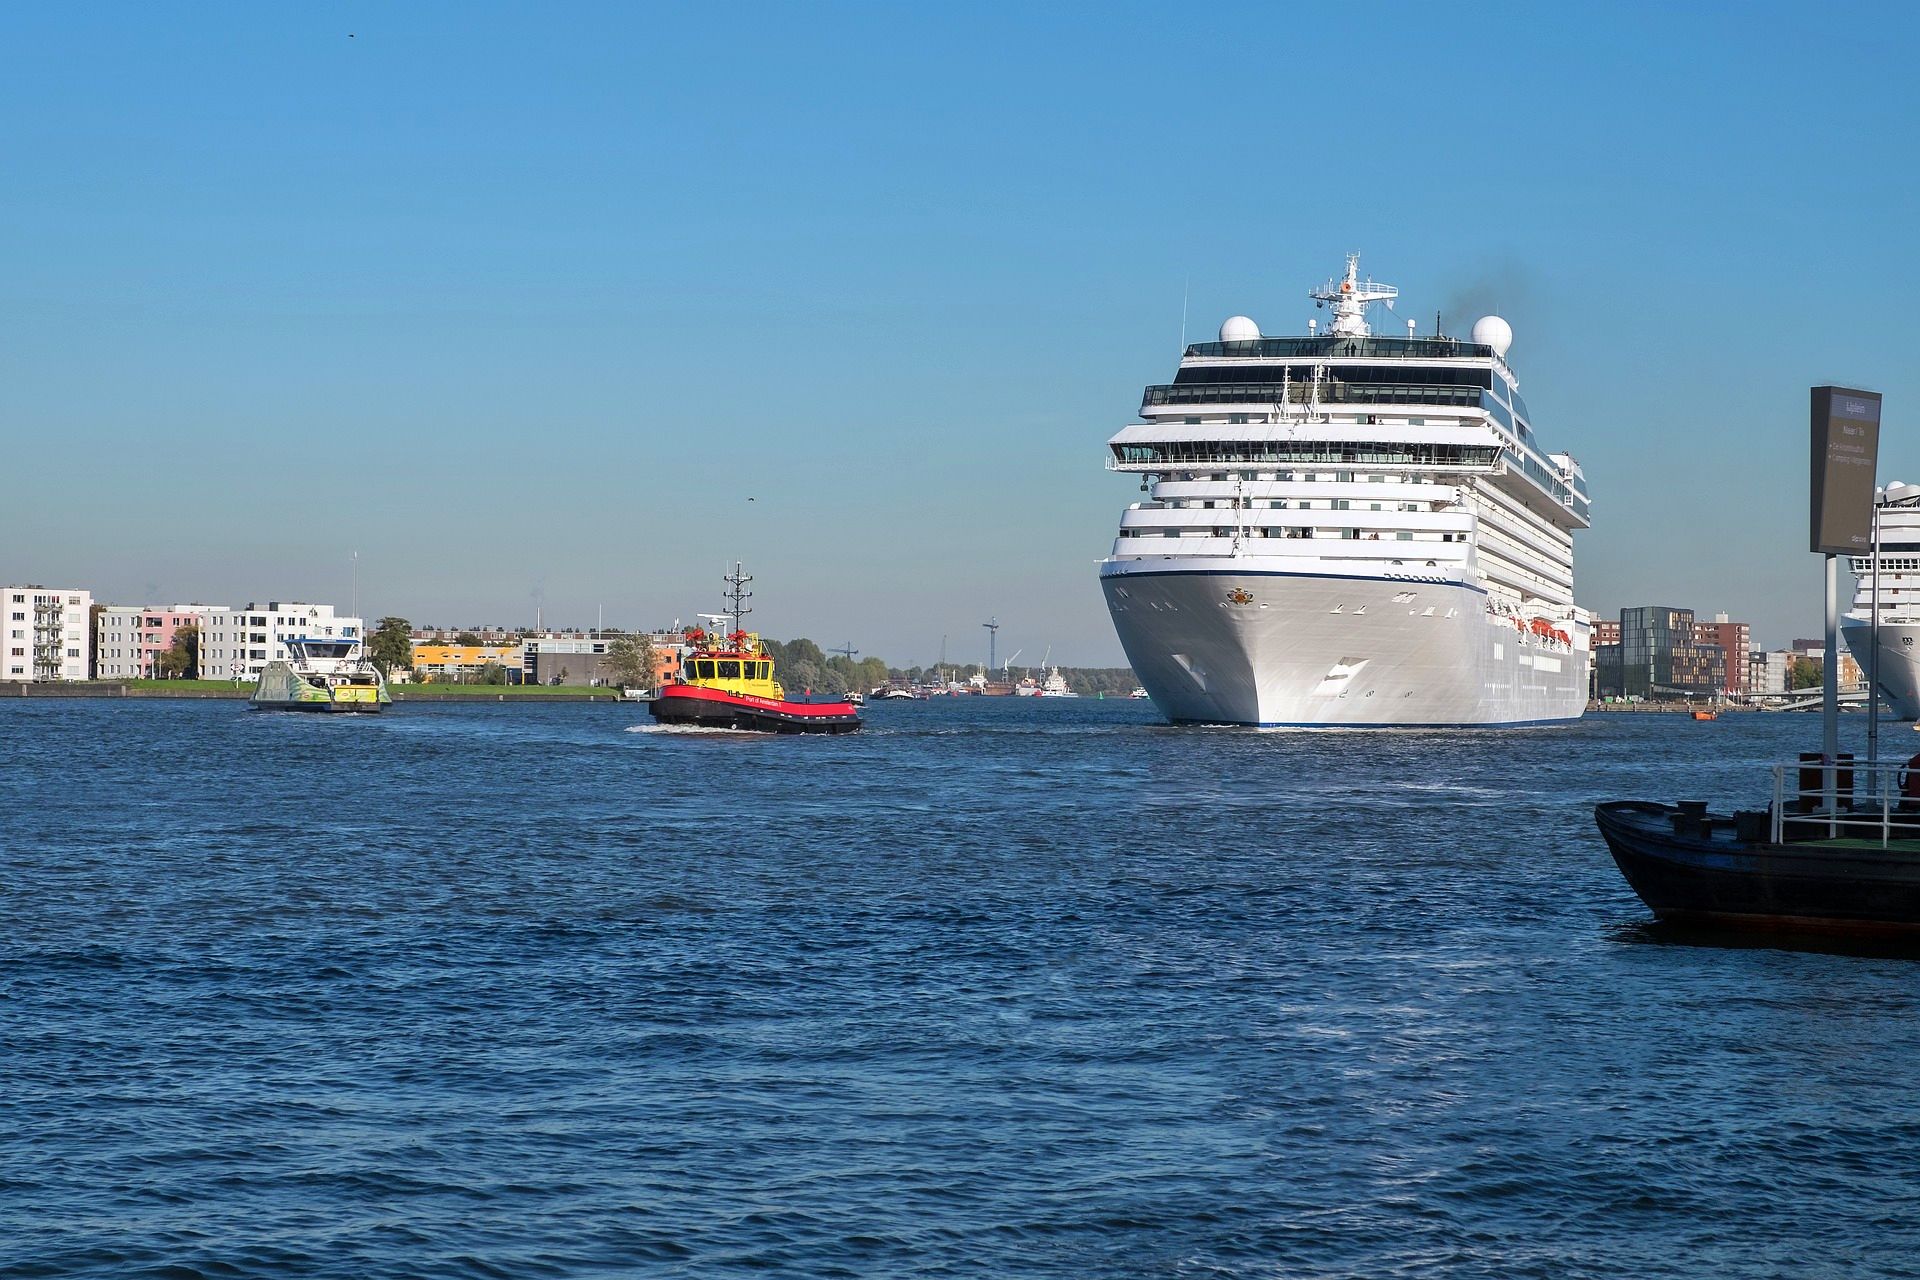 Amsterdam to ban cruise ships from its port